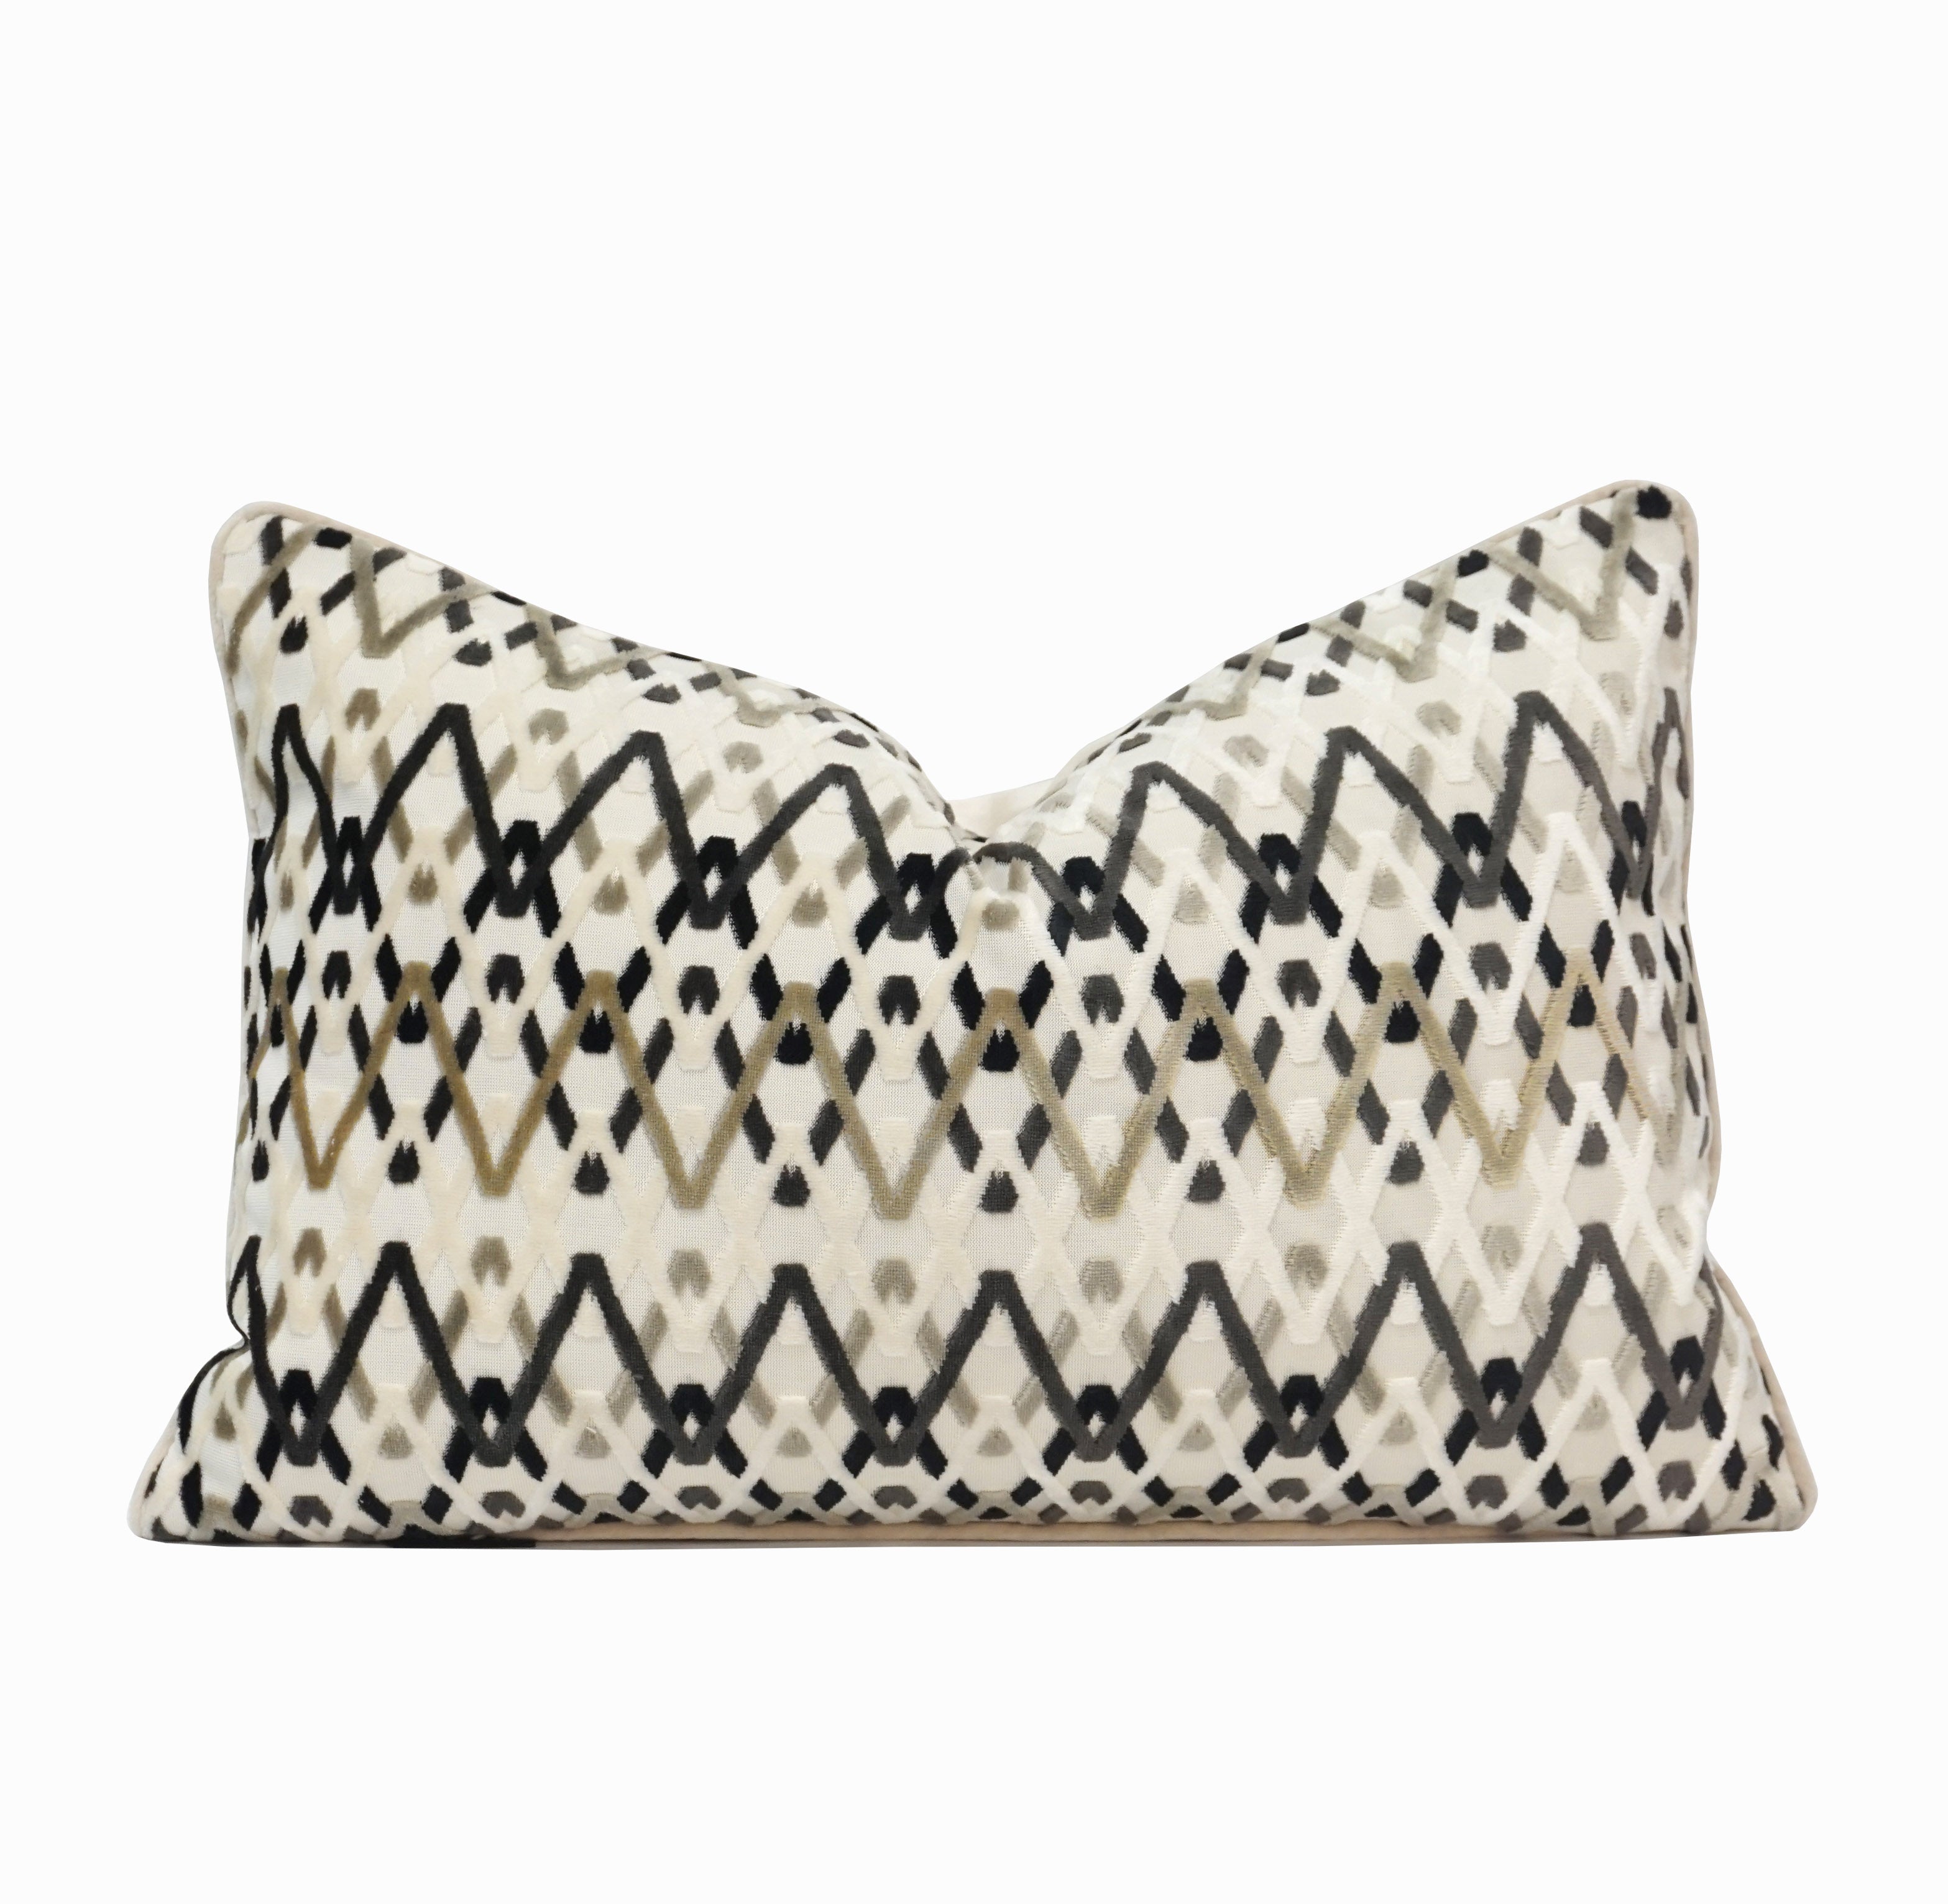 Sweep the Leg' Throw Pillow Cover 18” x 18”